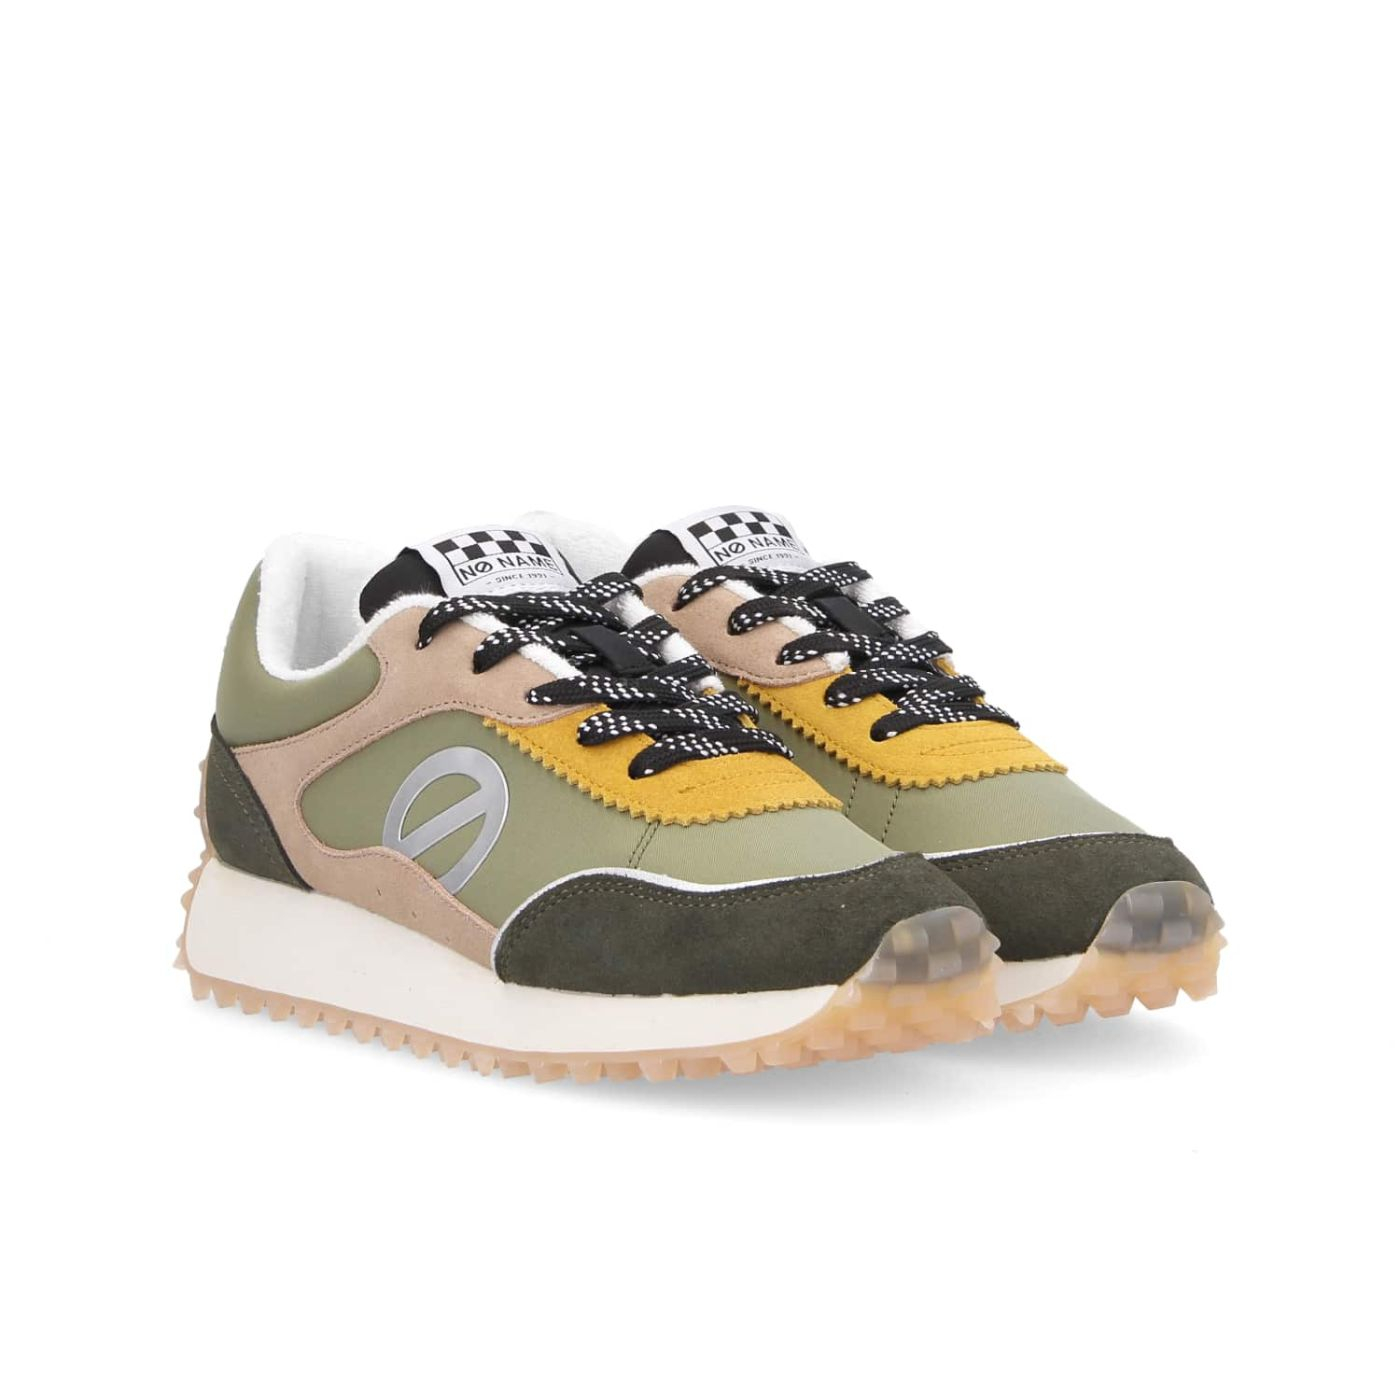 BASKETS NO NAME PUNKY JOGGER SUEDE/LUMINOUS OLIVE